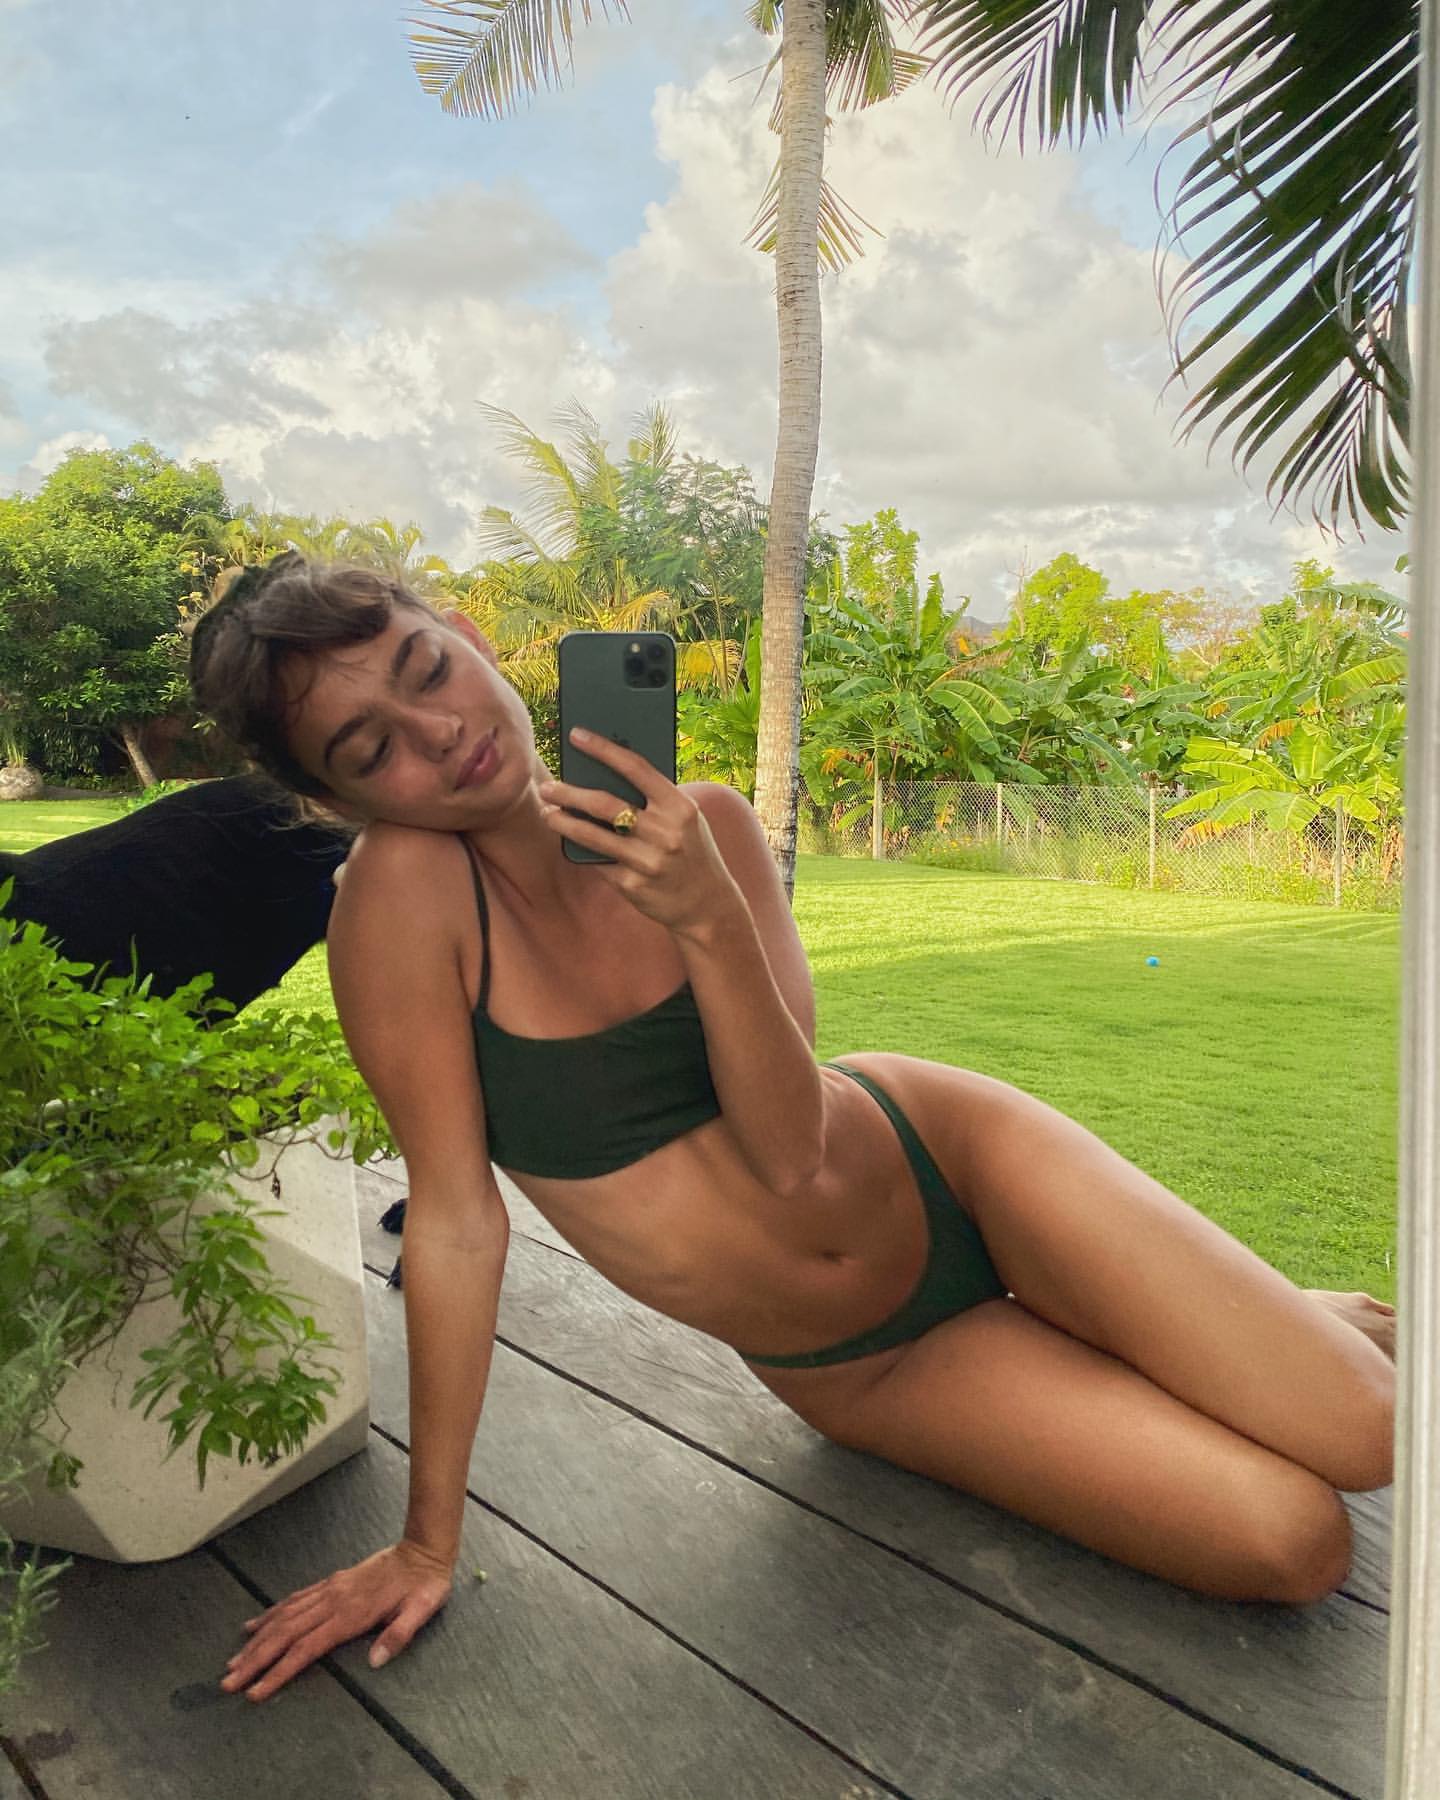 Photos n°7 : She’s Not Done Yet – Inka Williams Back with a Booty Shot!